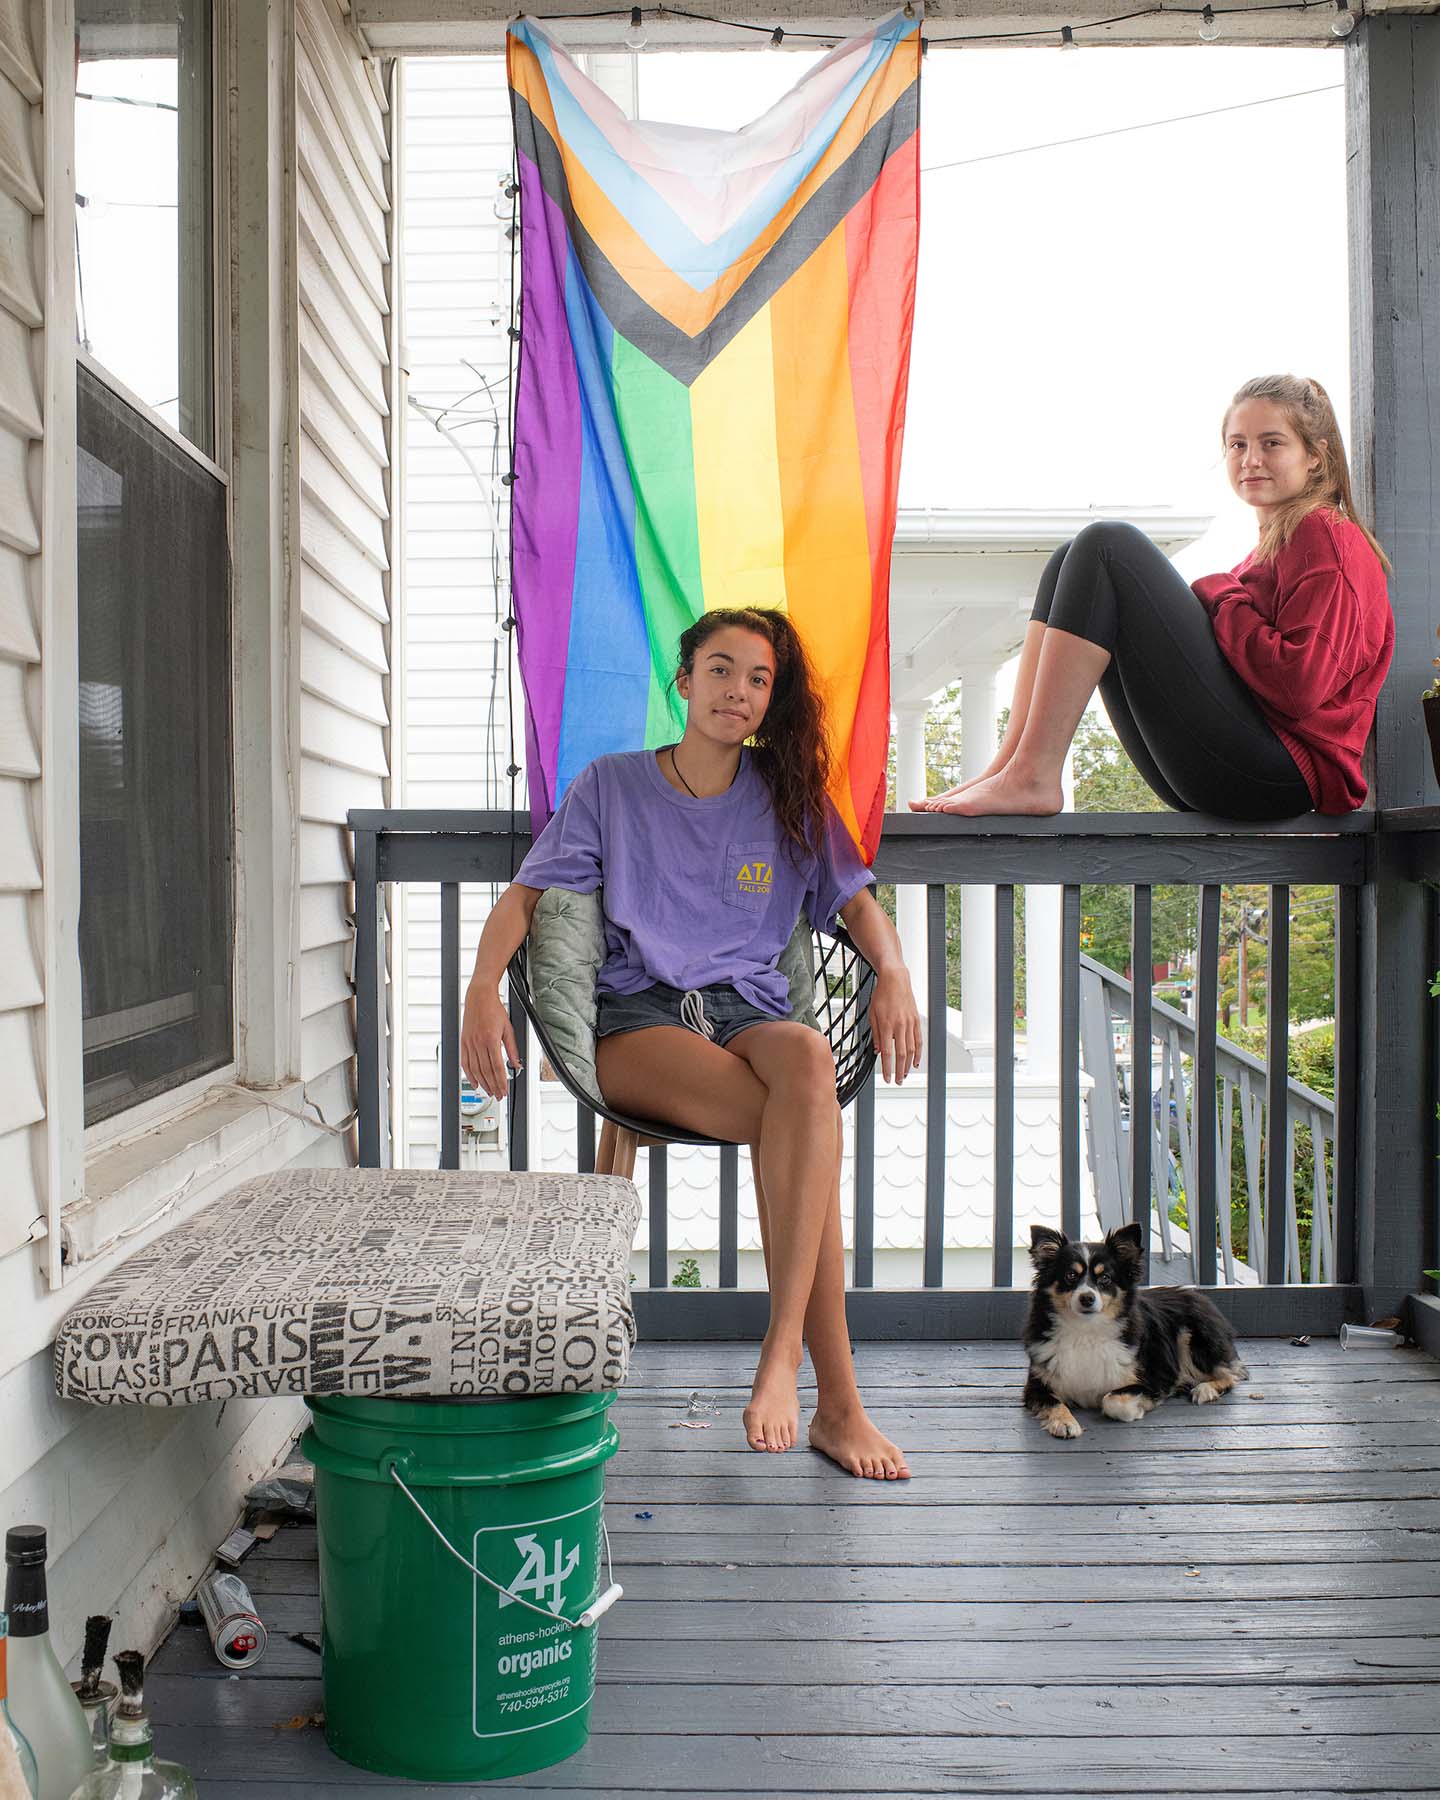 Students with their dog posing on their front porch with their pride flag